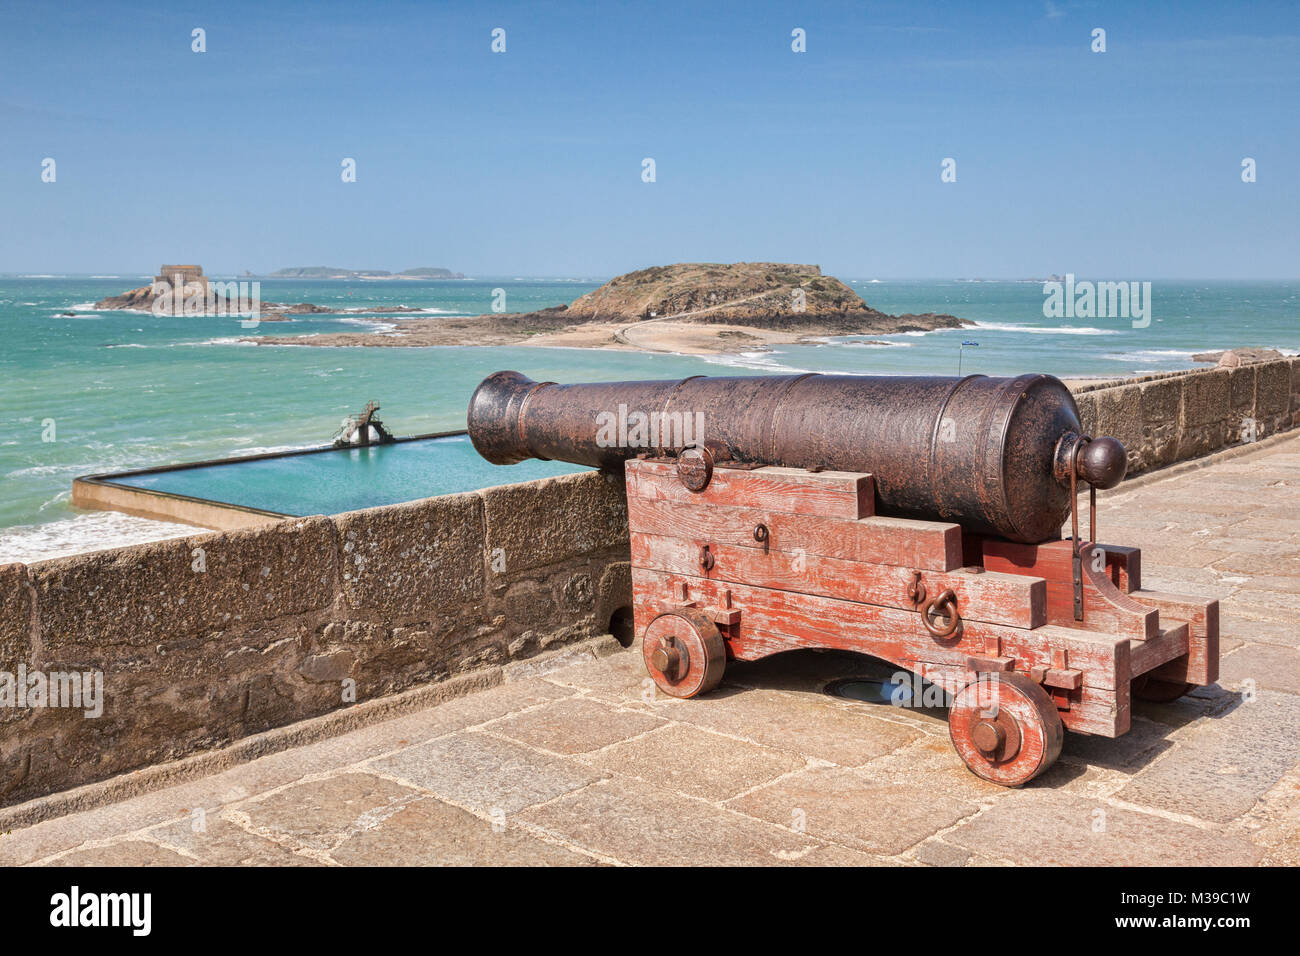 Cannon looking out over the bay at Saint Malo, Brittany, France. Focus on cannon. Stock Photo